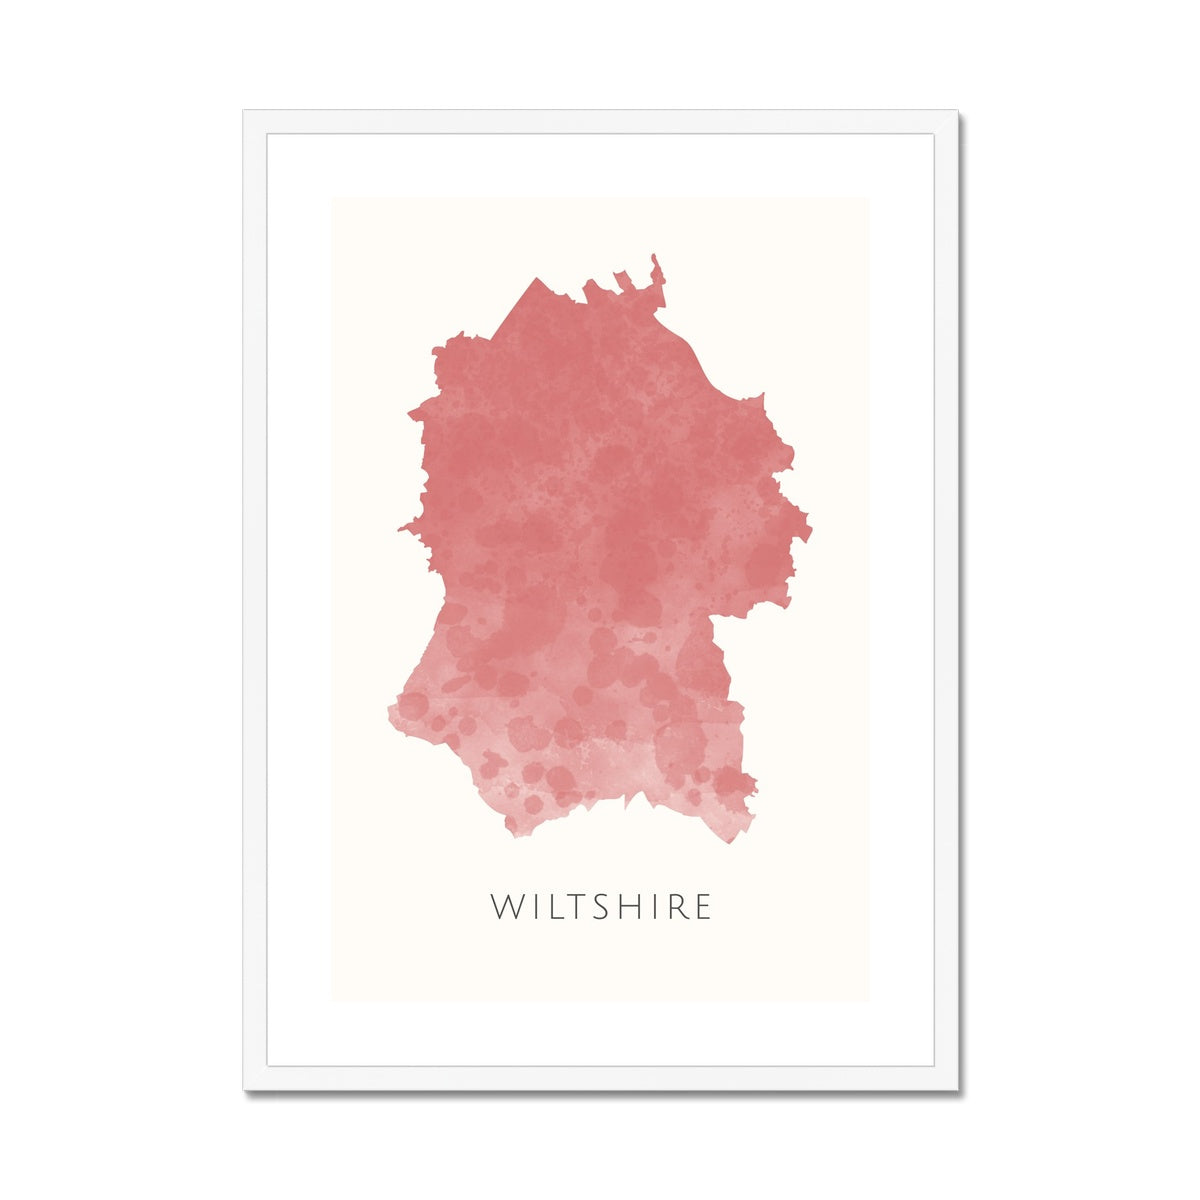 Wiltshire -  Framed & Mounted Map